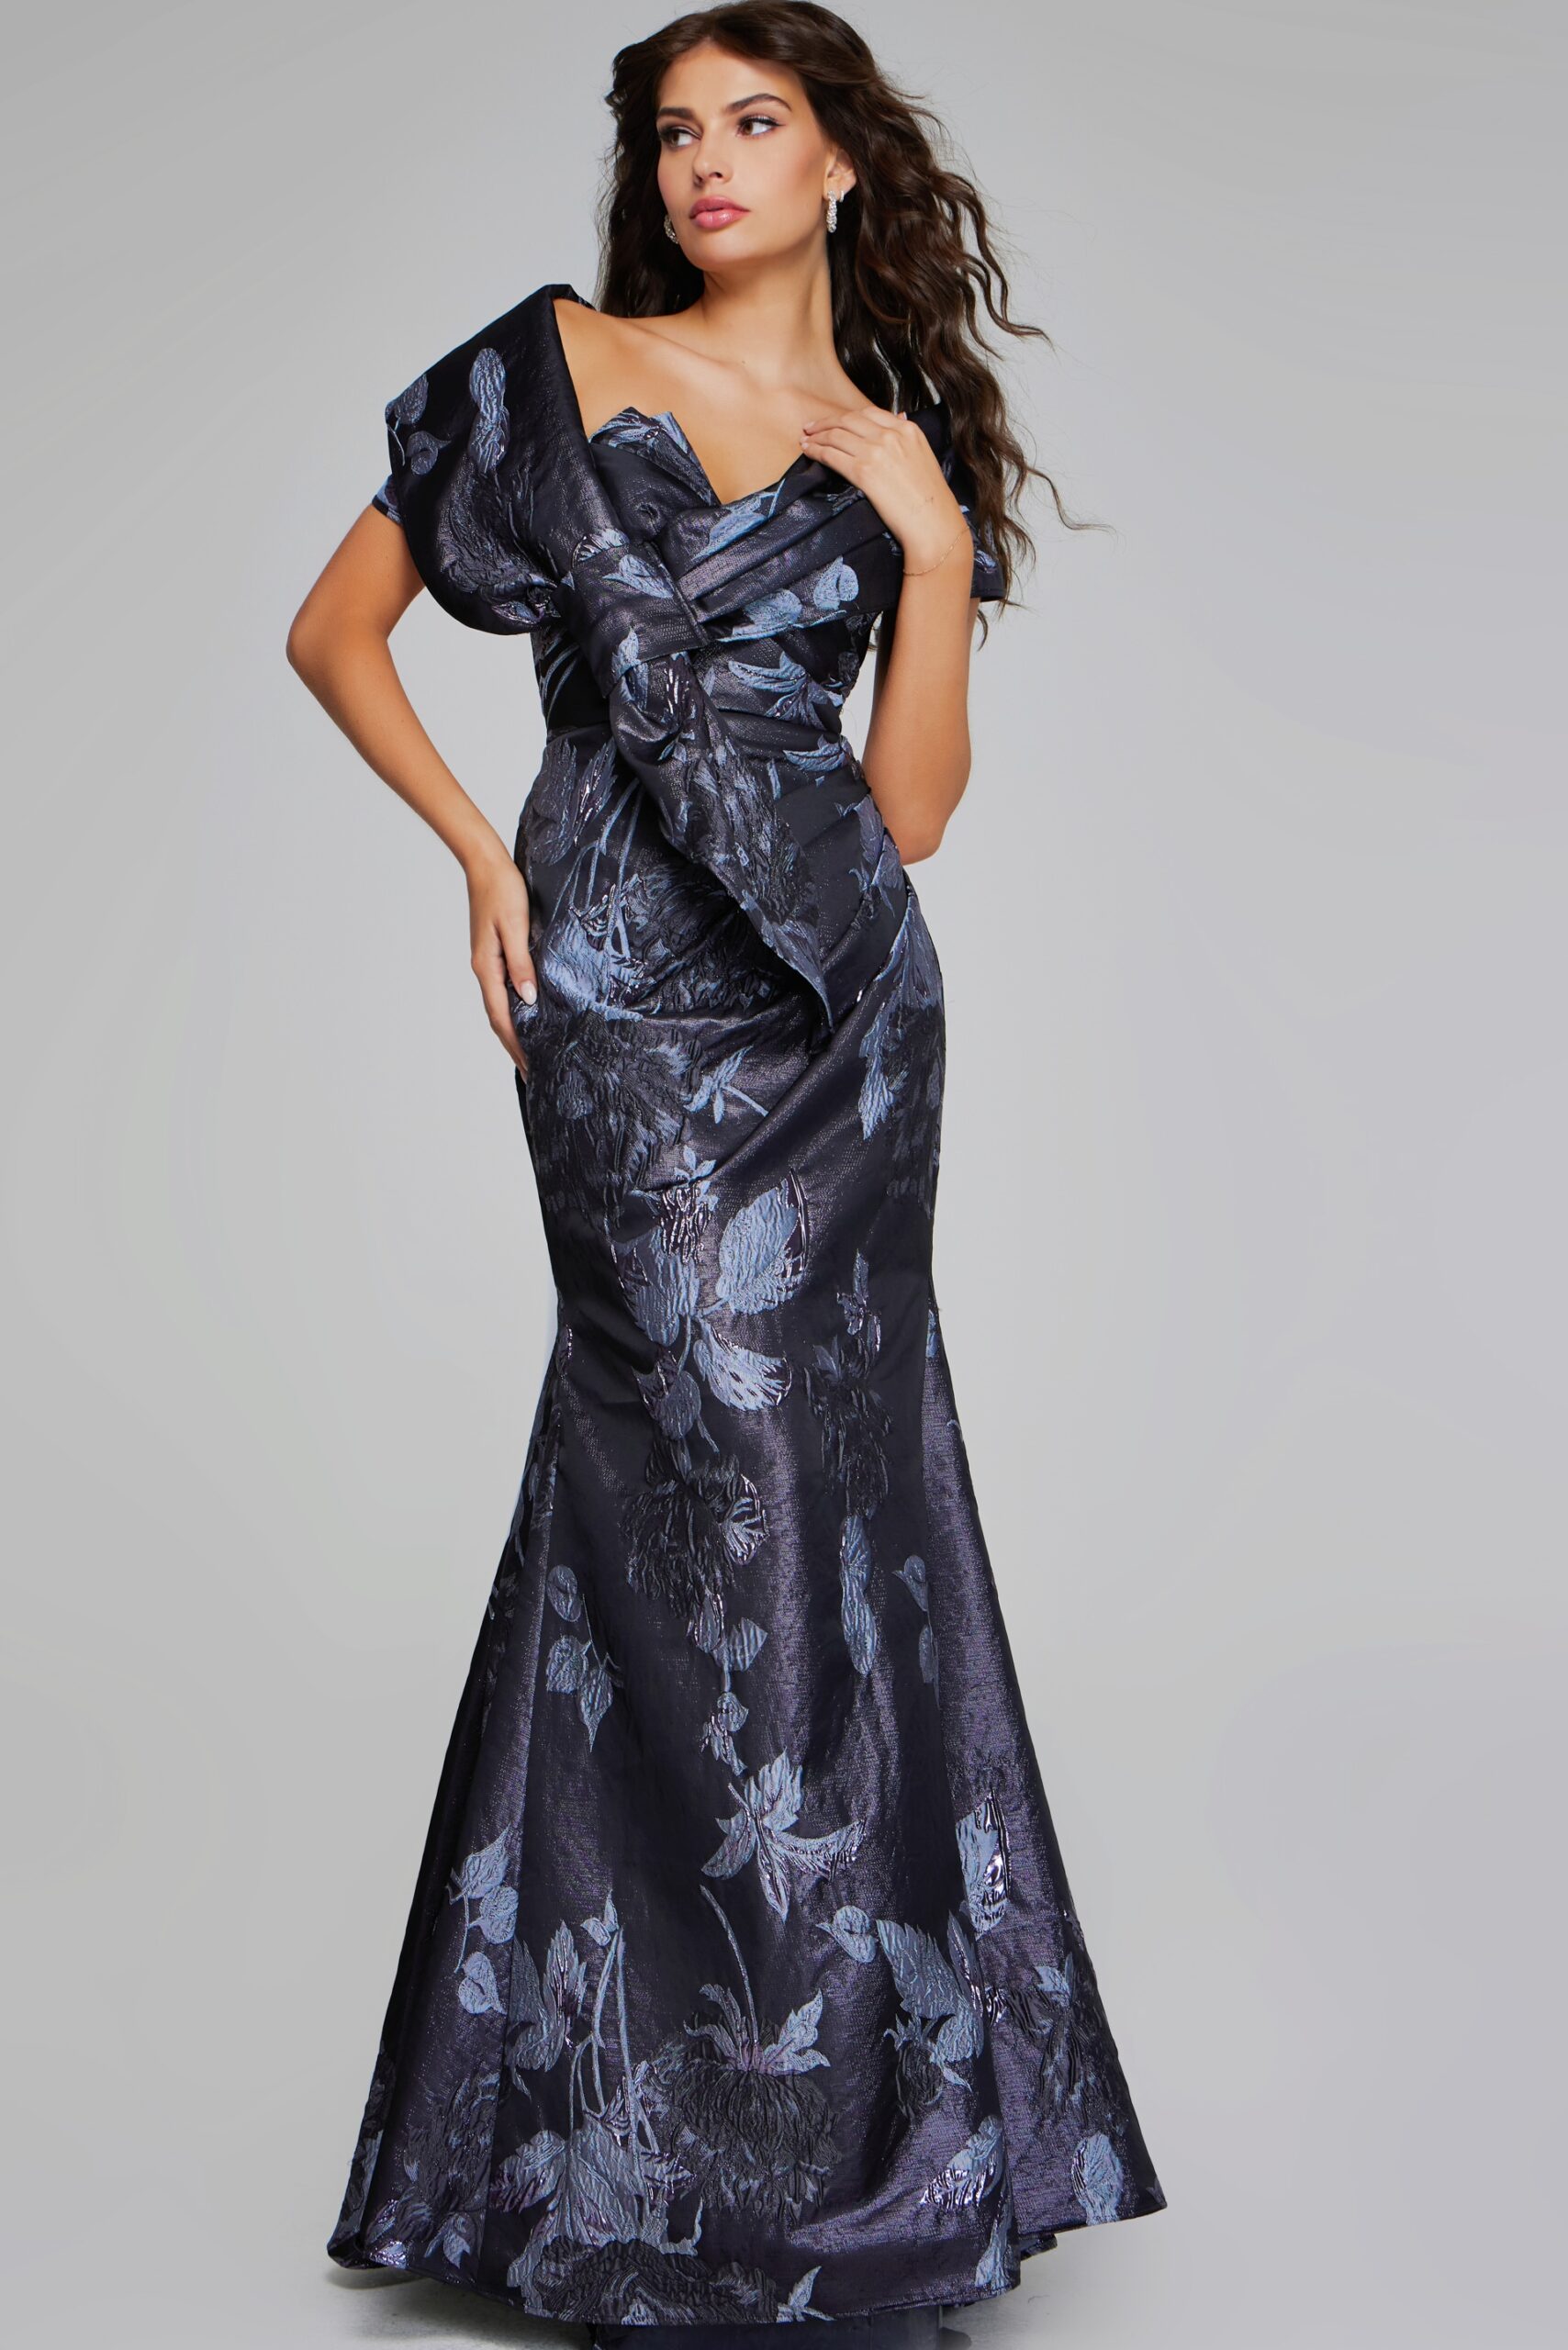 Model wearing Elegant Grey Multi-Floral Gown with Asymmetrical Detailing 40309